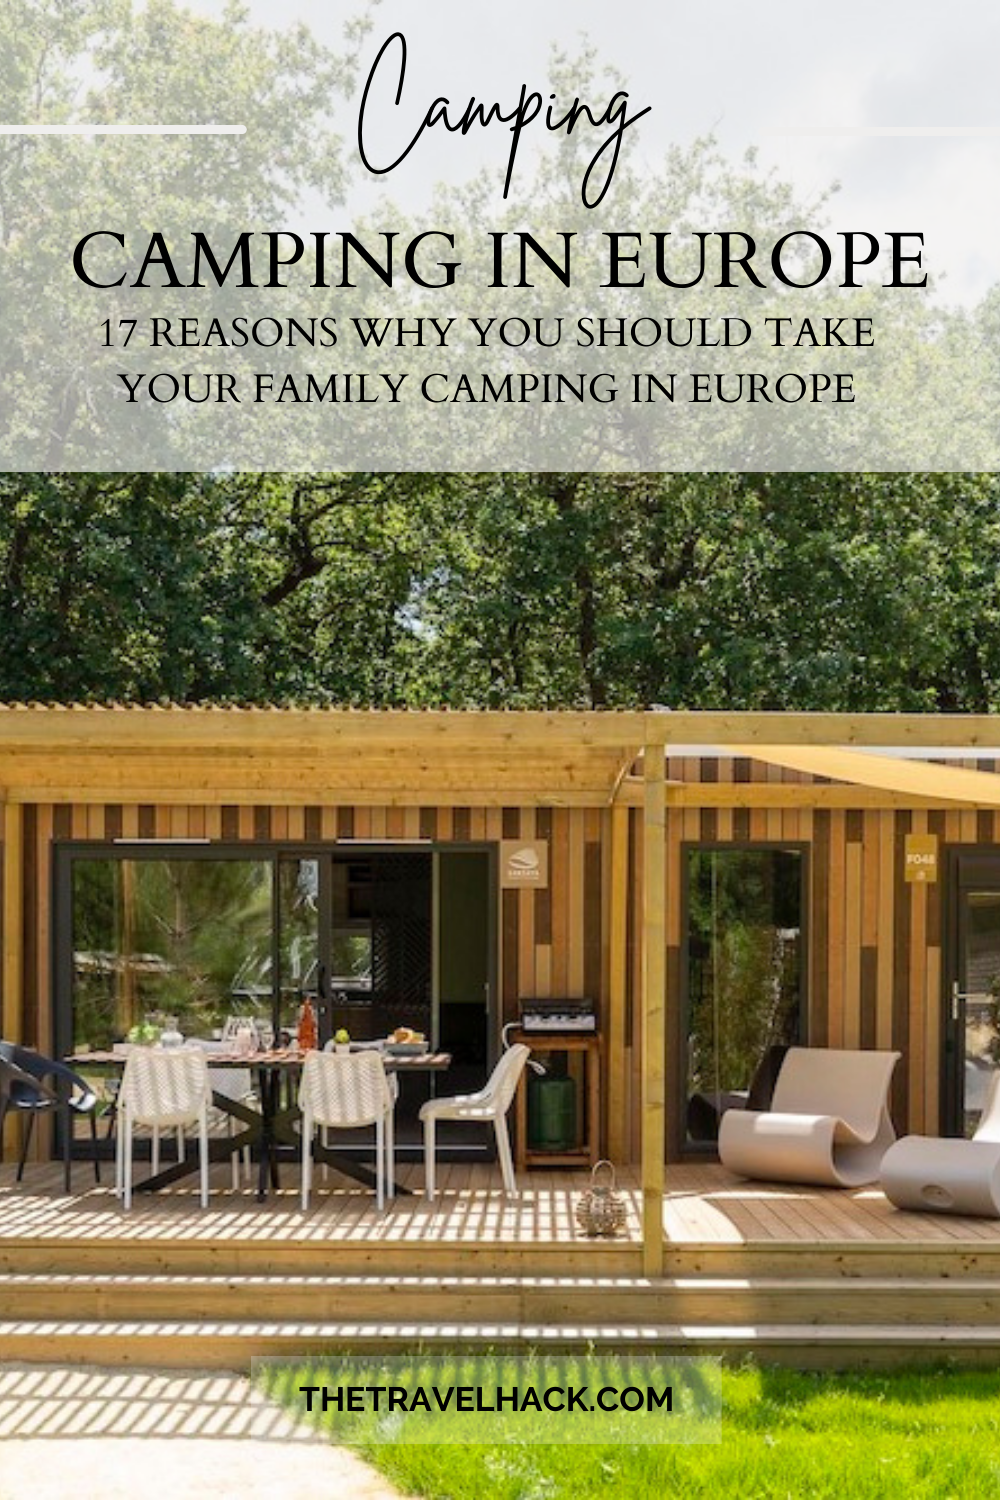 Why you should take your family camping in Europe